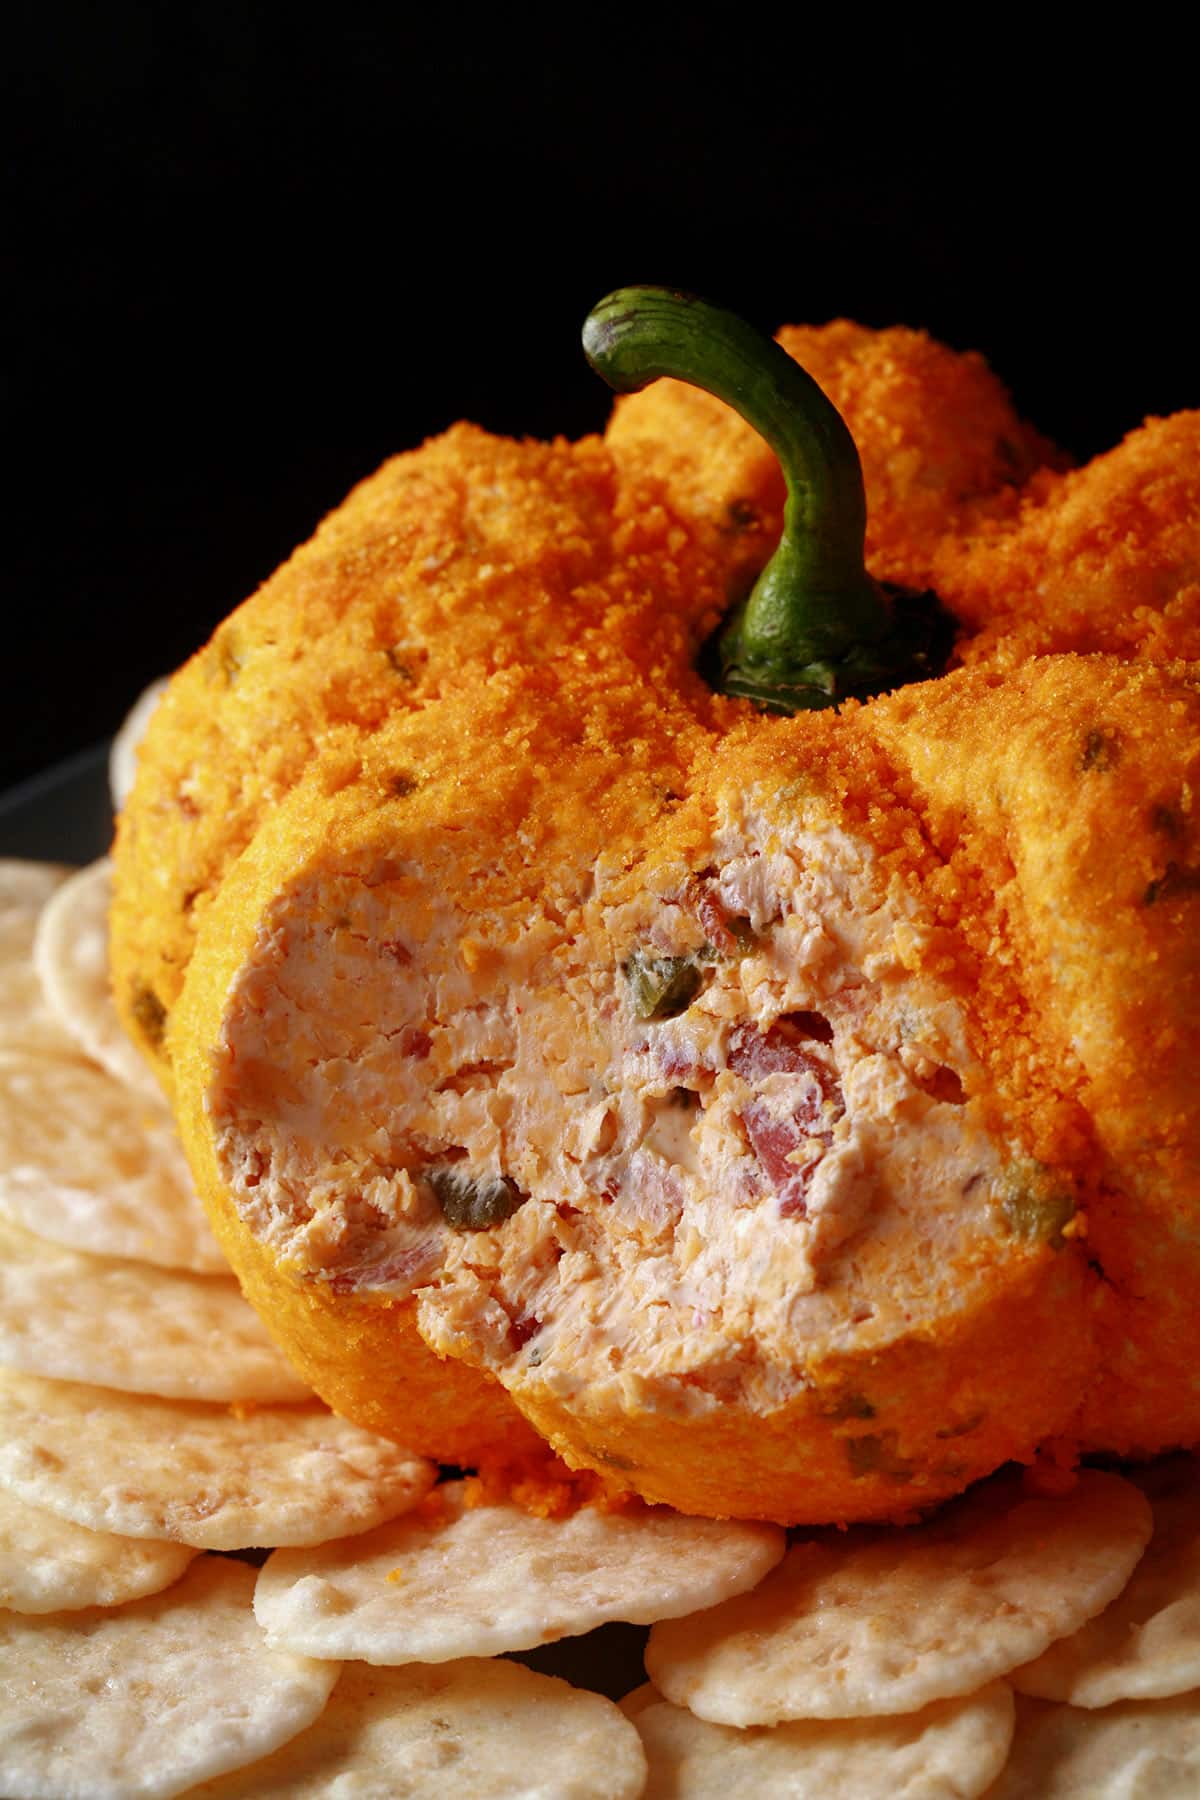 A pumpkin shaped cheese ball with bacon and jalapenos visible inside.